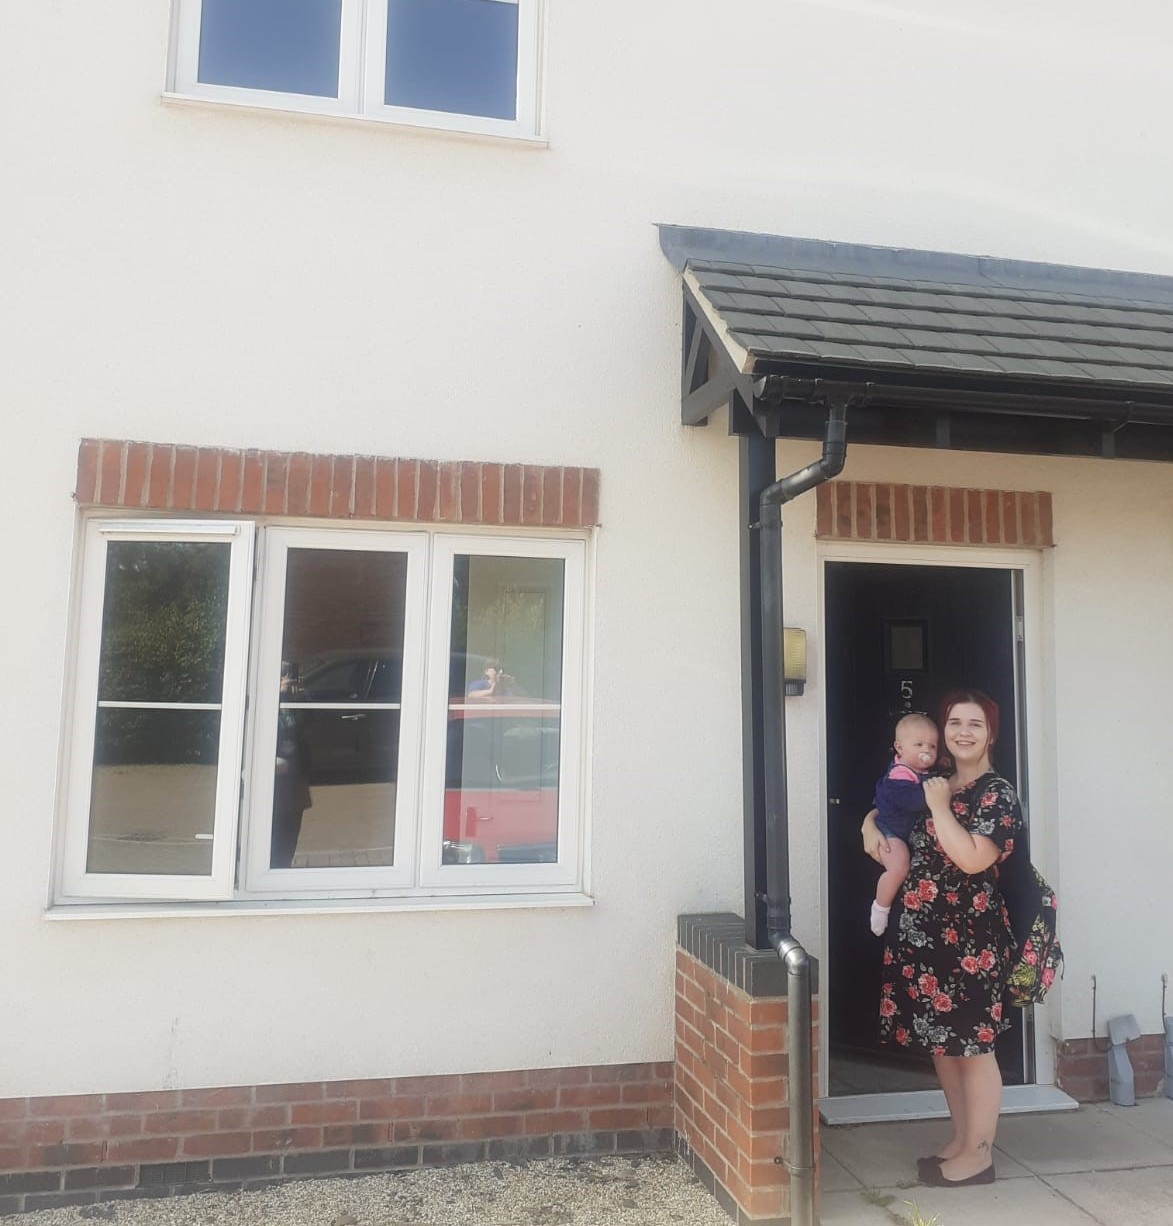 Leanne and daughter outside new home